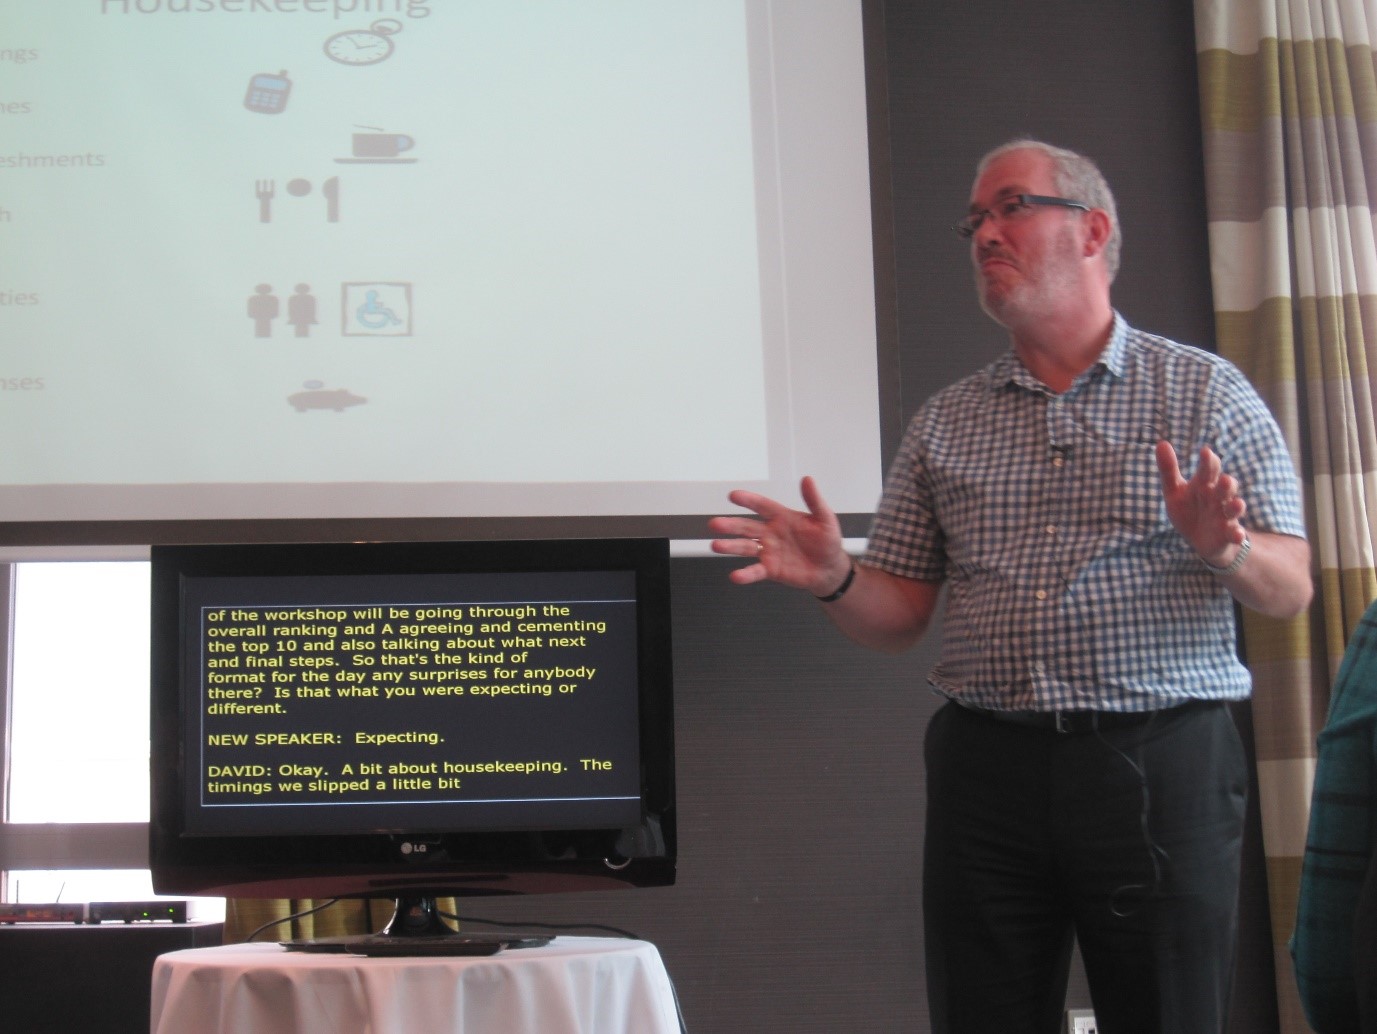 A man speaking at a conference with real-time speech-to-text reporting on a screen beside him